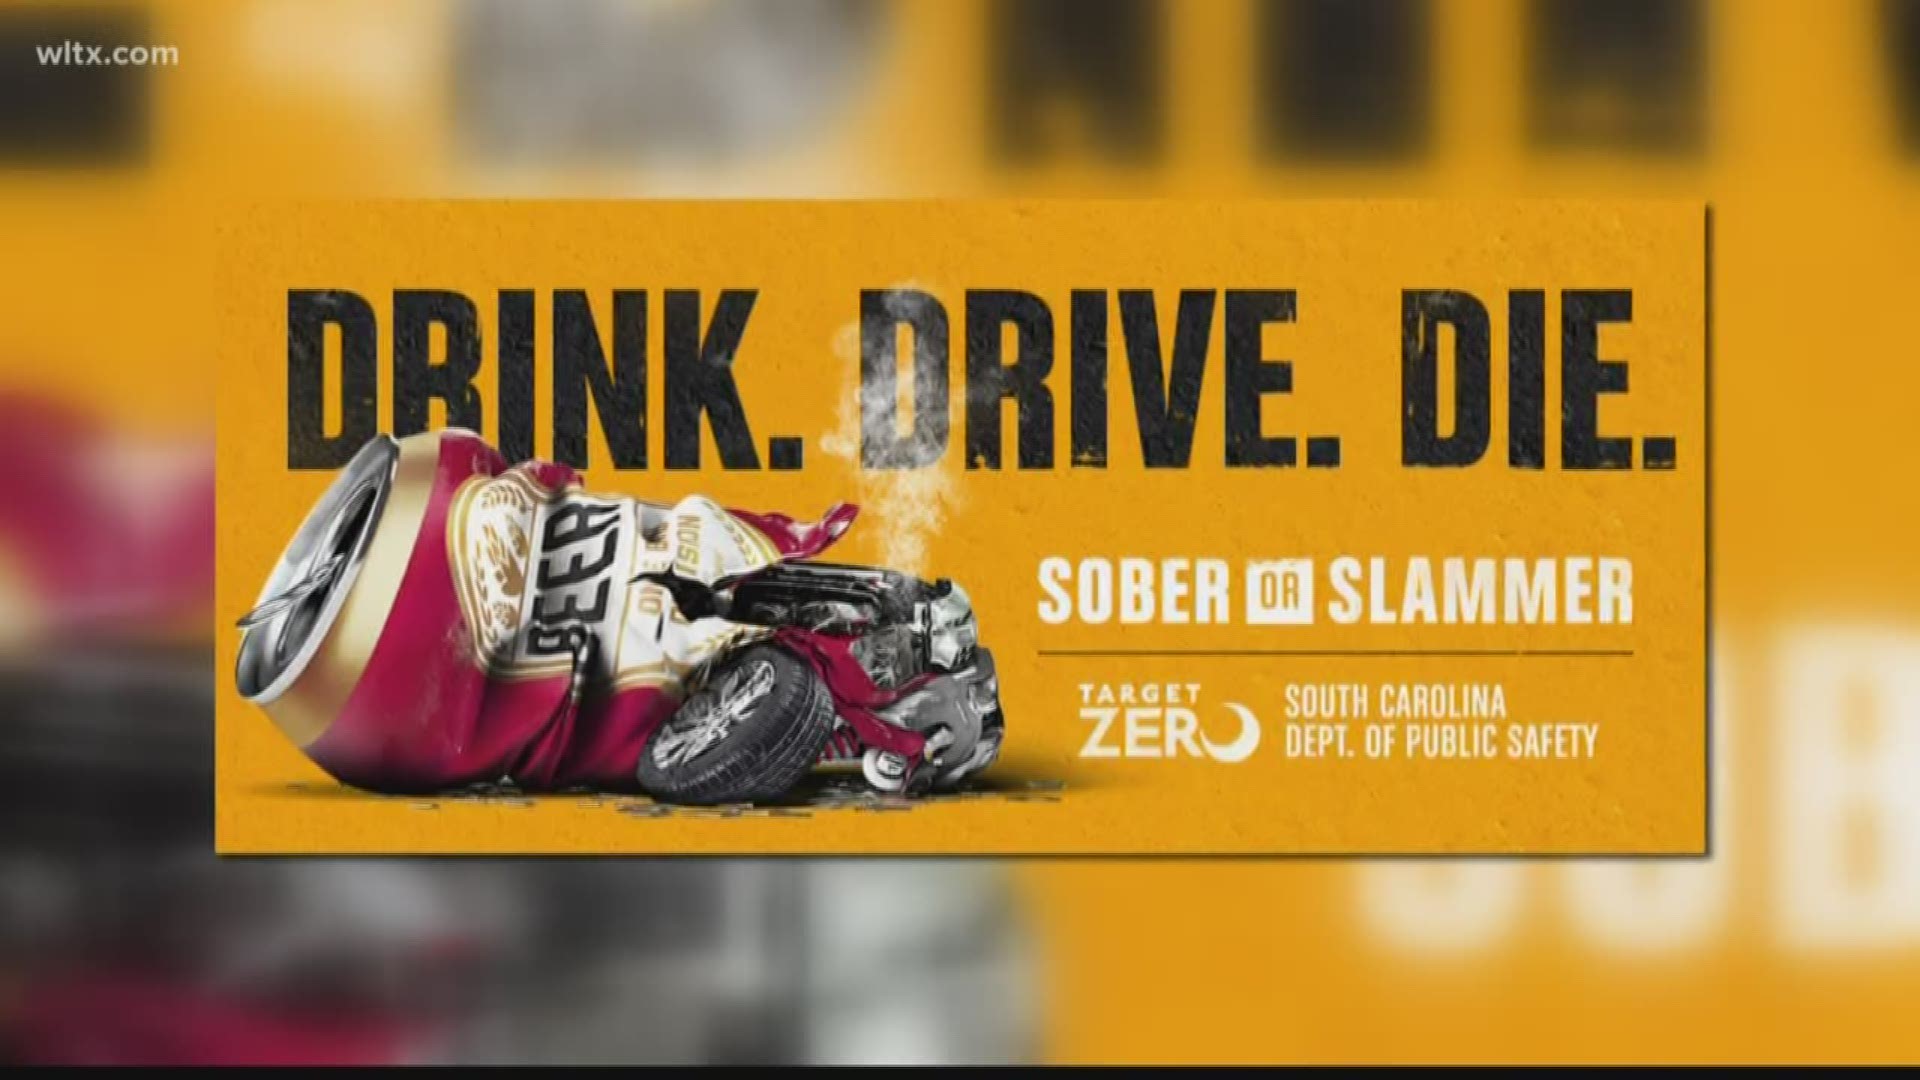 Law enforcement agencies are teaming up to crack down on drunk driving this holiday season.